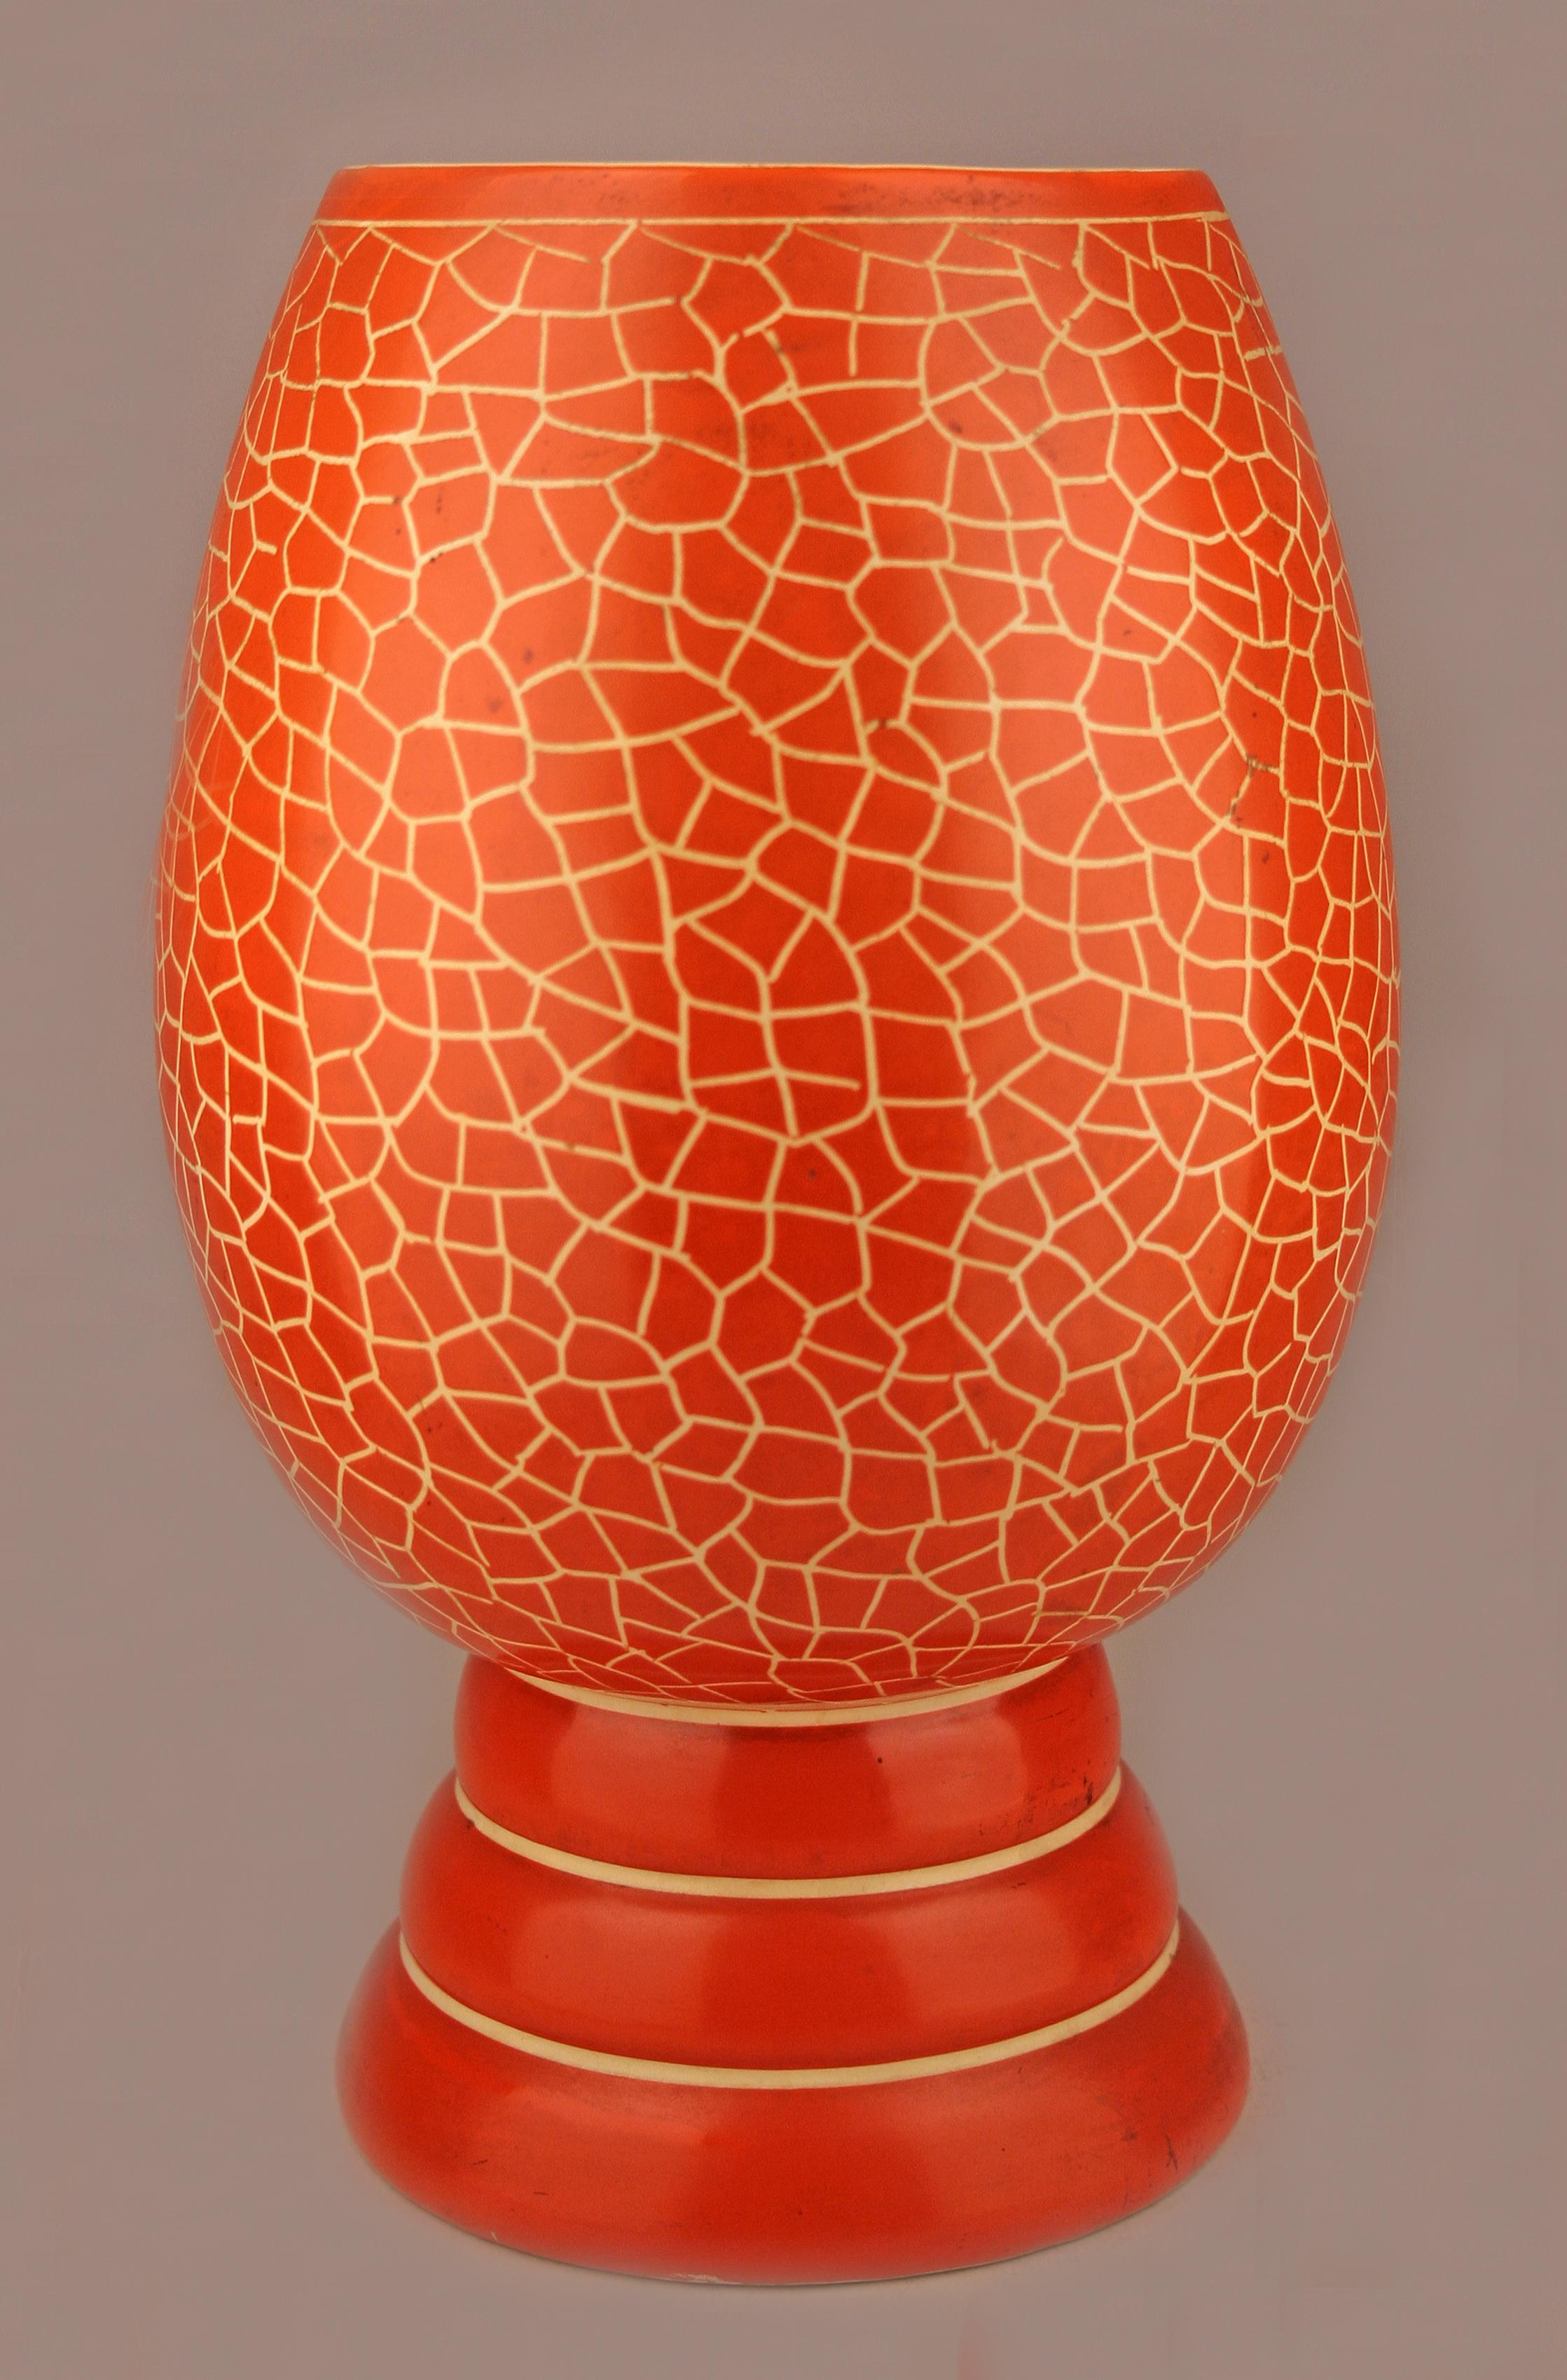 Mid-20th century Modern Deruta-like italian orange glazed ceramic painted vase

By: Deruta (in the style of)
Material: ceramic, pottery, paint
Technique: molded, pressed, painted, glazed
Date: mid-20th century, circa 1950
Style: Mid-Century Modern,